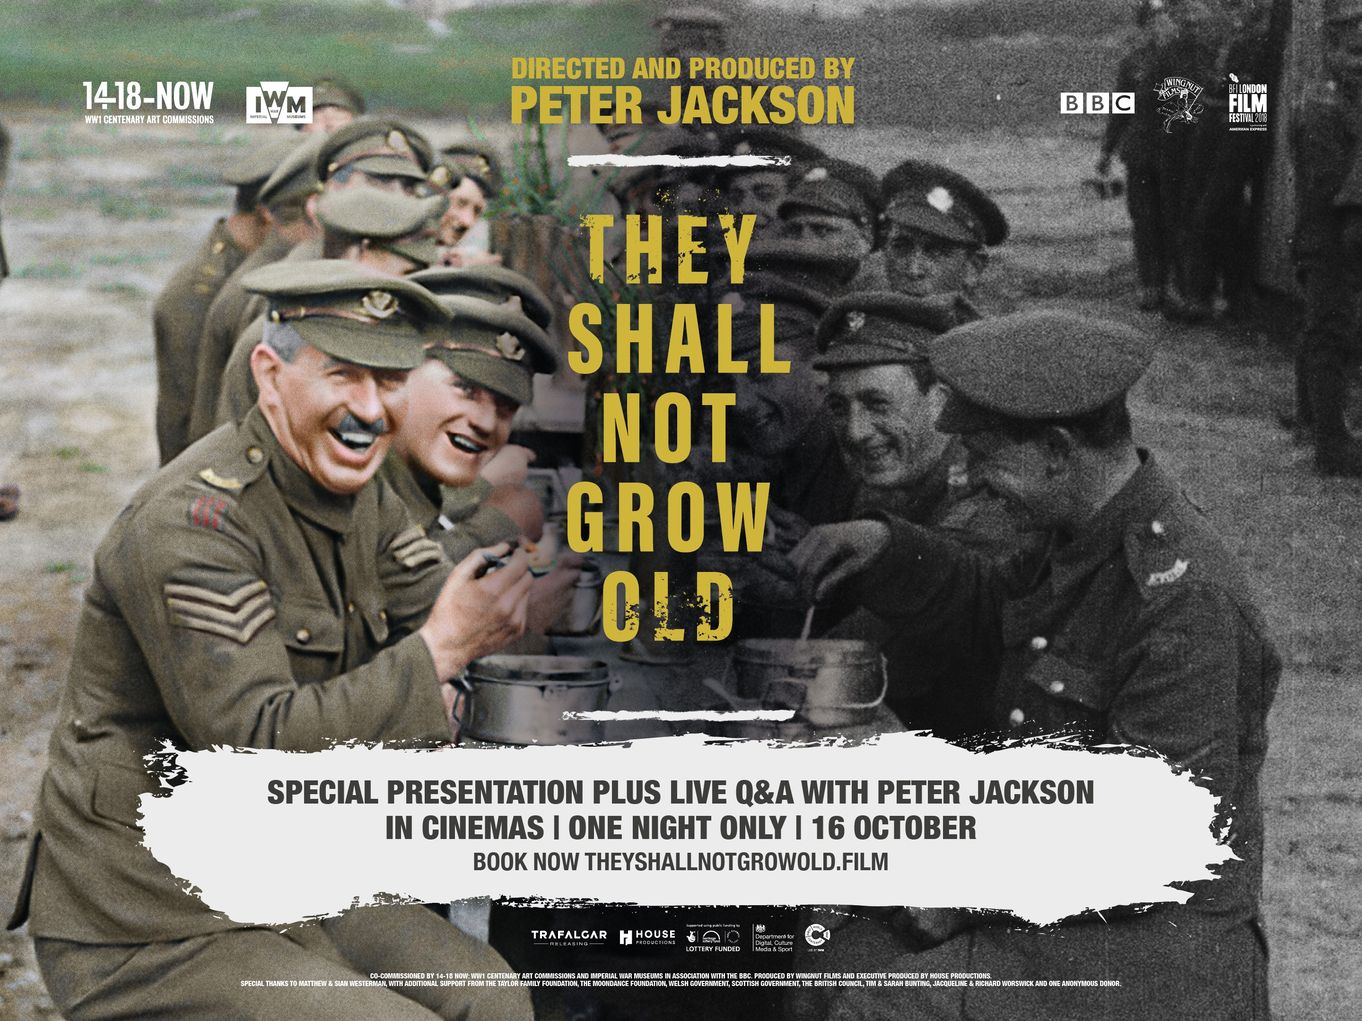 THEY SHALL NOT GROW OLD + LIVE-STREAMED Q&A WITH PETER JACKSON